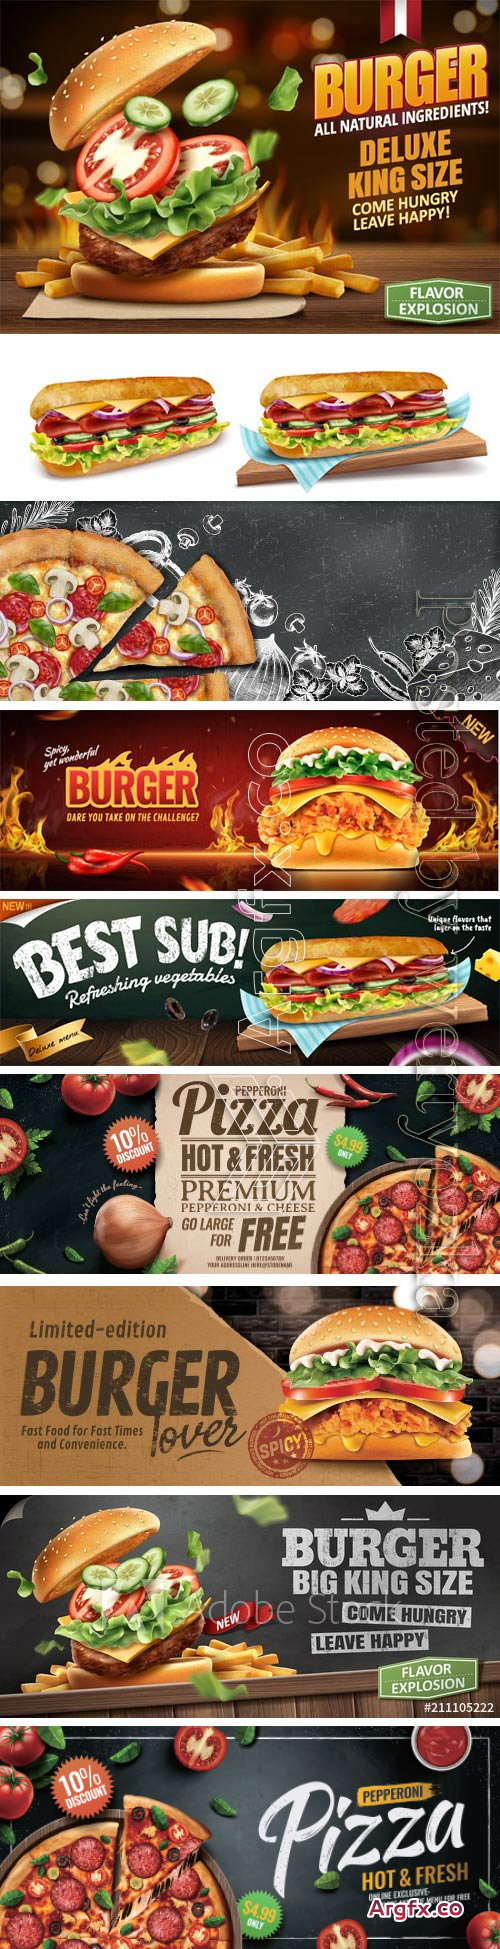 Fast Food, Pizza, Burger, Hot Sandwiches